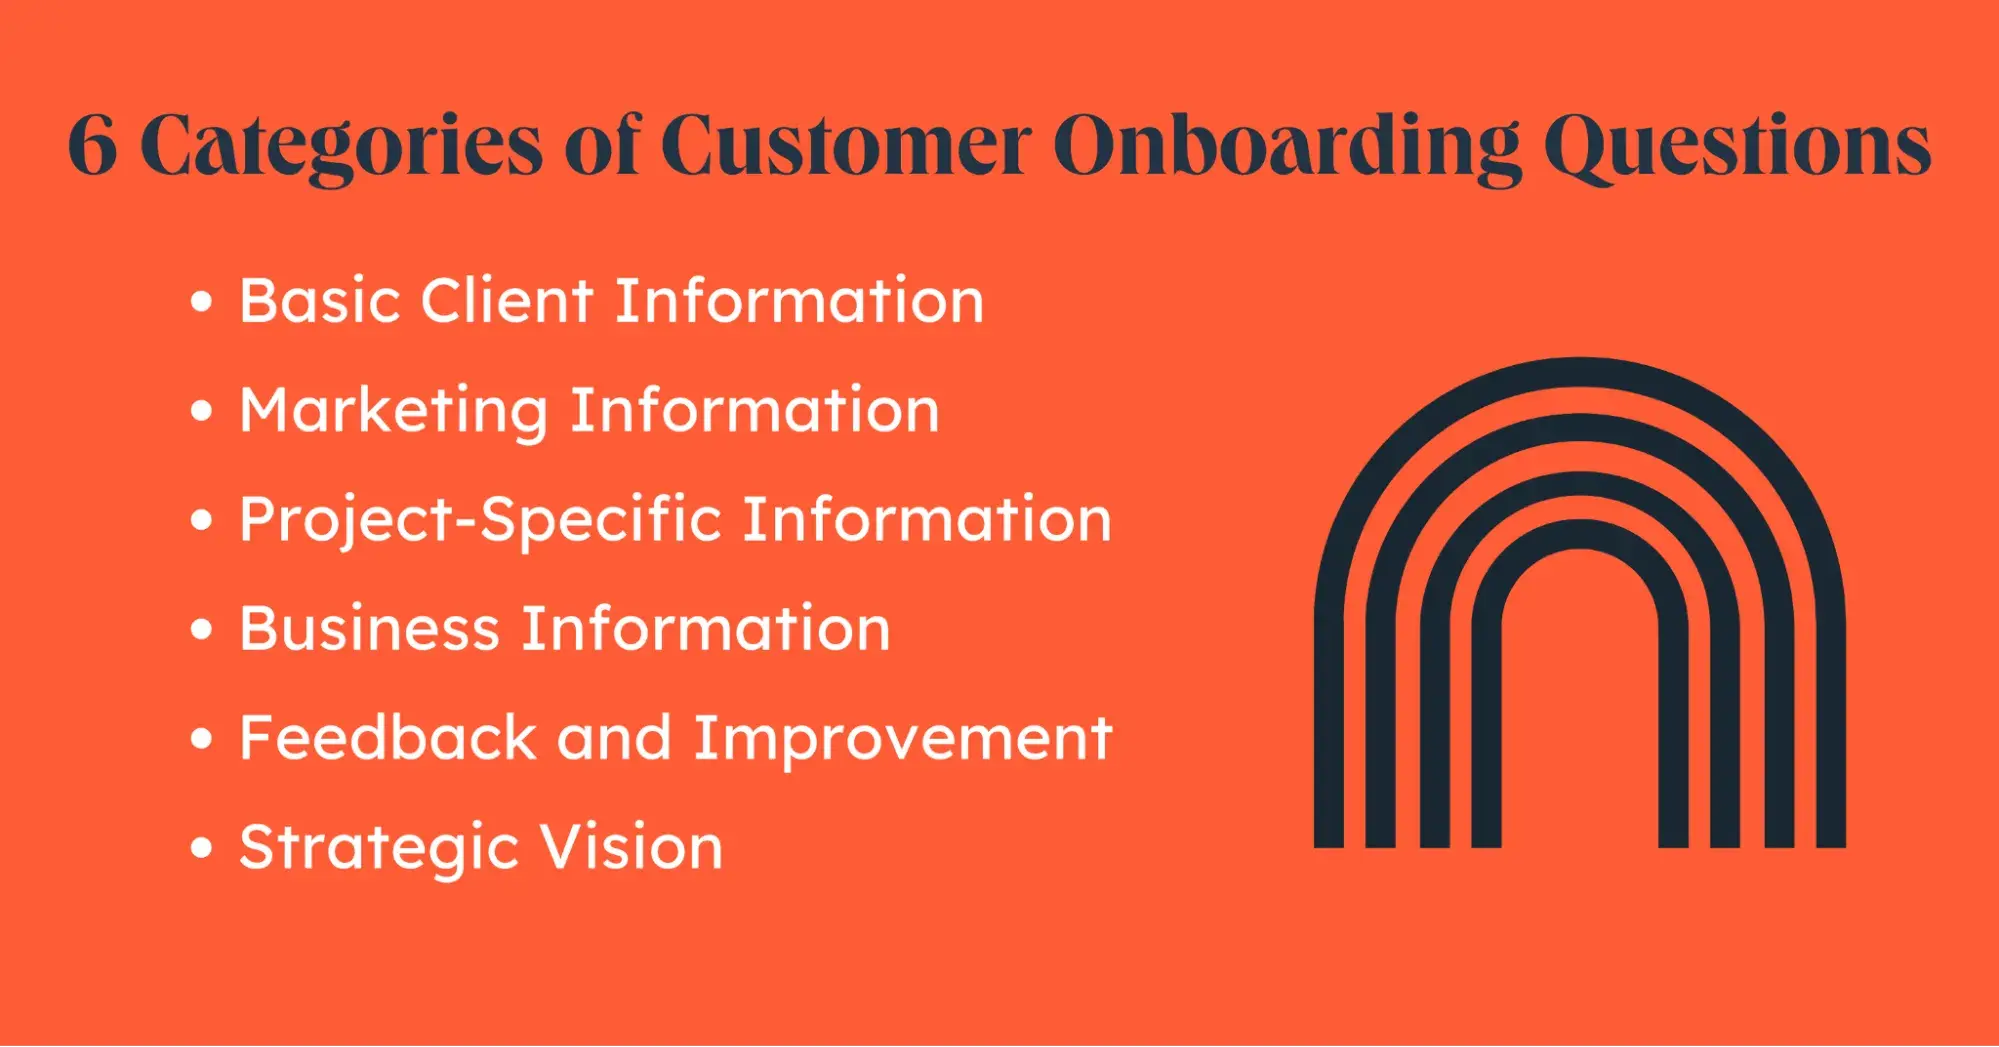 client onboarding questionnaire categories for questions